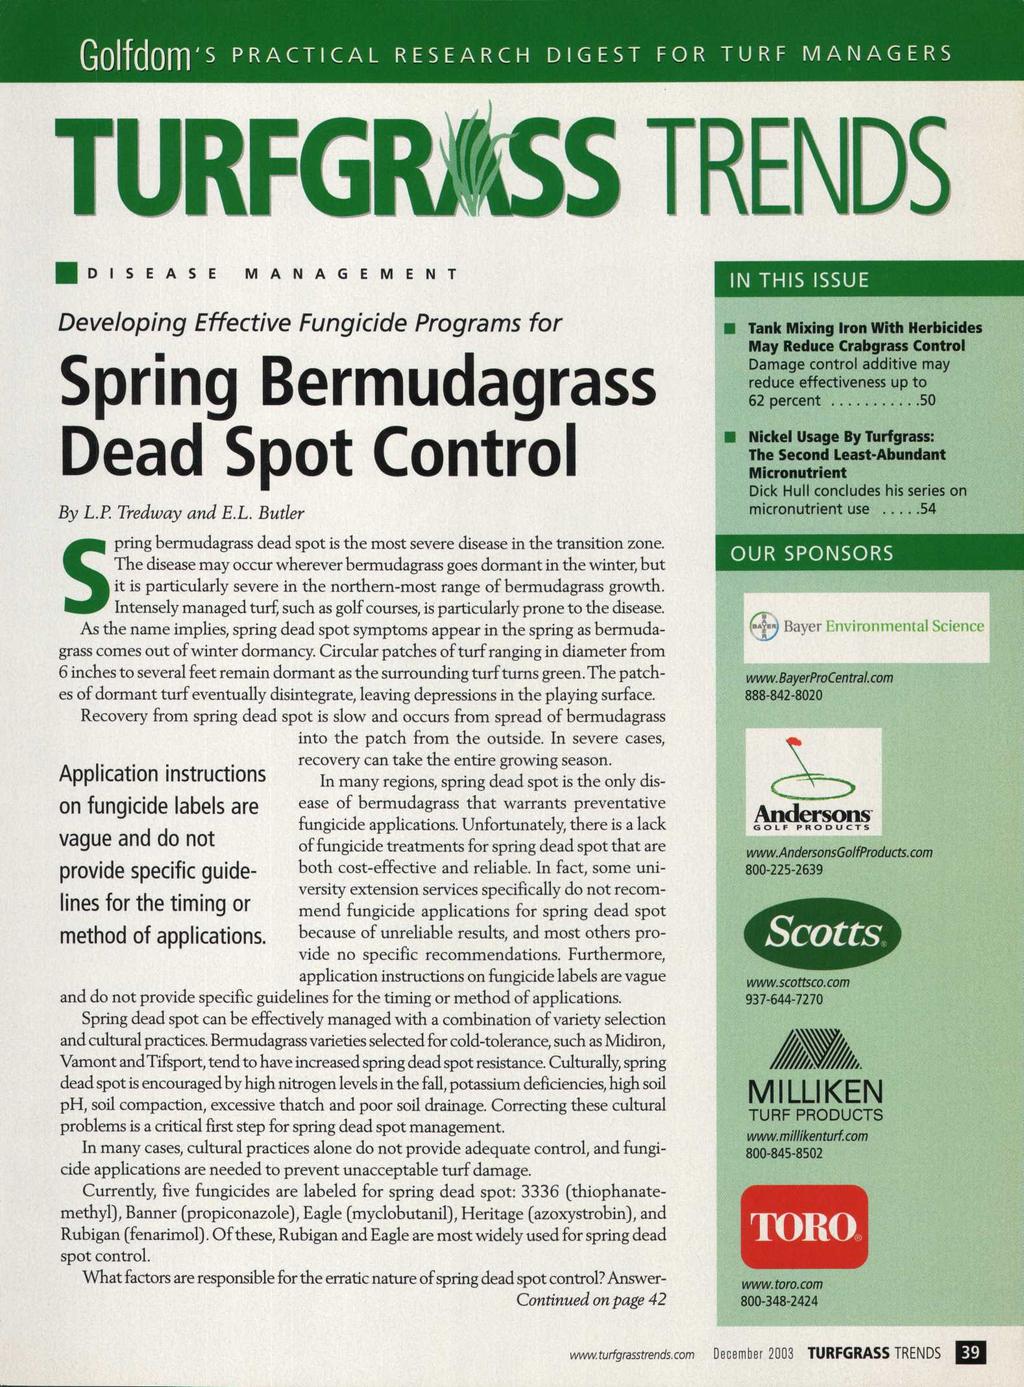 Golfdom S PRACTICAL RESEARCH DIGEST FOR TURF MANAGERS TRENDS I D I S E A S E M A N A G E M E N T Developing Effective Fungicide Programs for Spring Bermudagrass Dead Spot Control By L.P. Tredway and E.